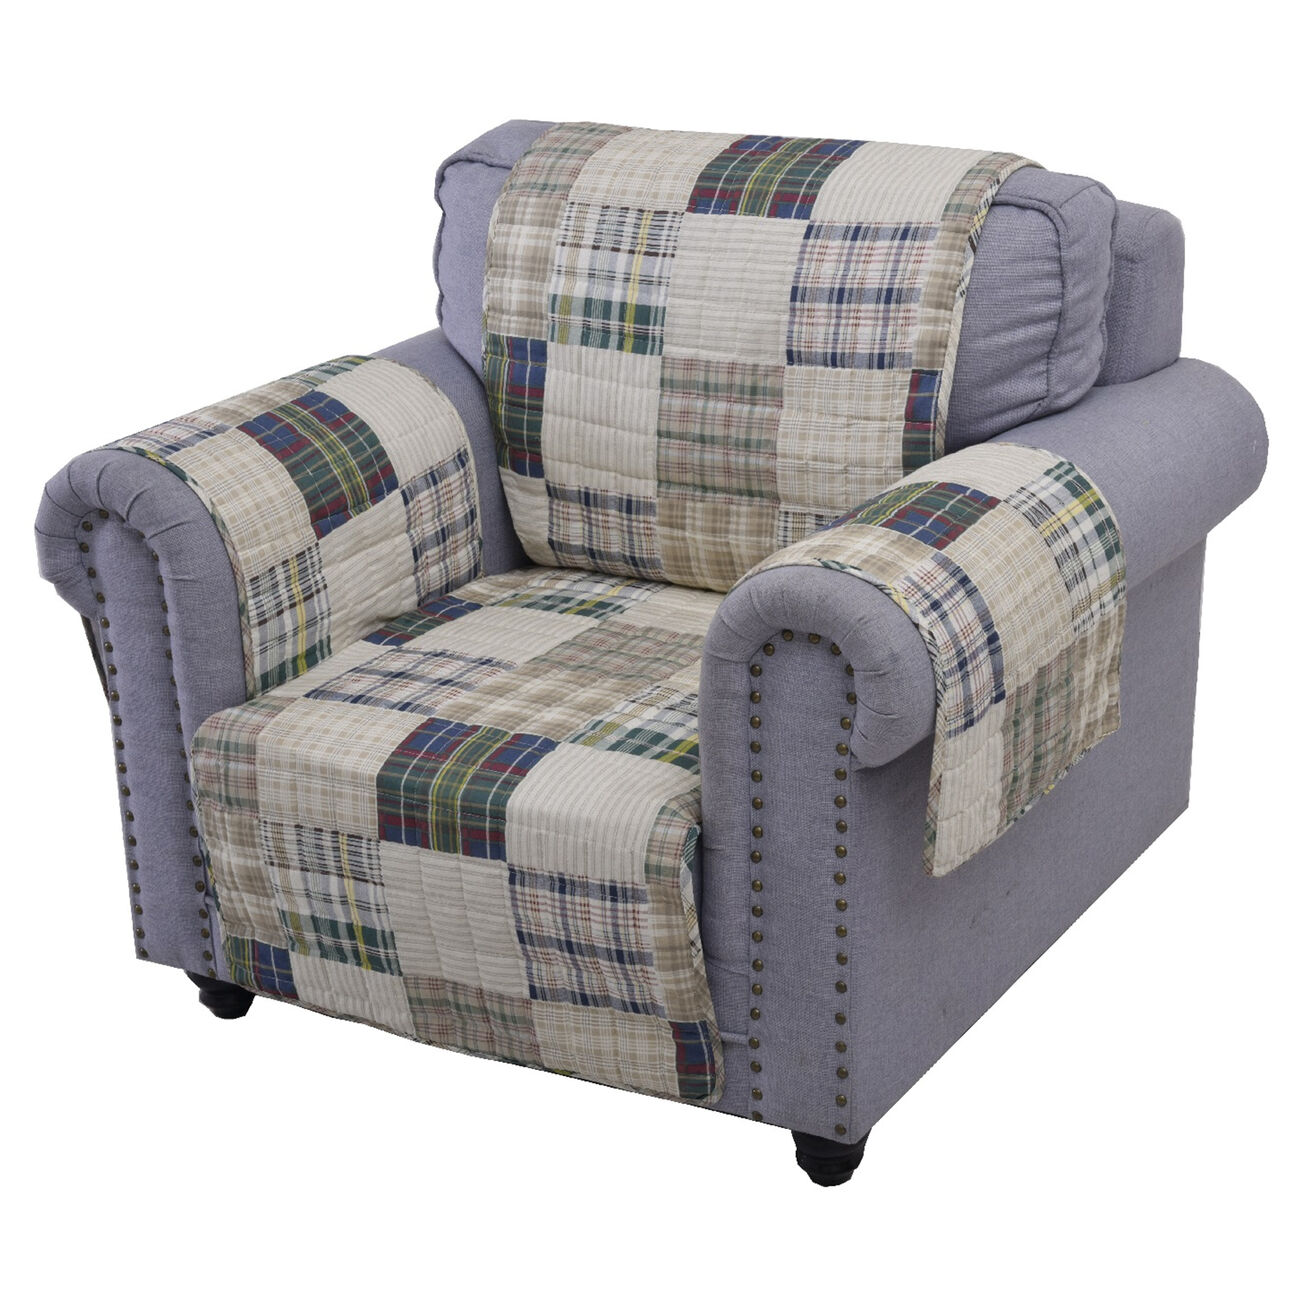 Waterproof Lining Arm Chair Protector with Plaid Square Design, Multicolor - BM223408